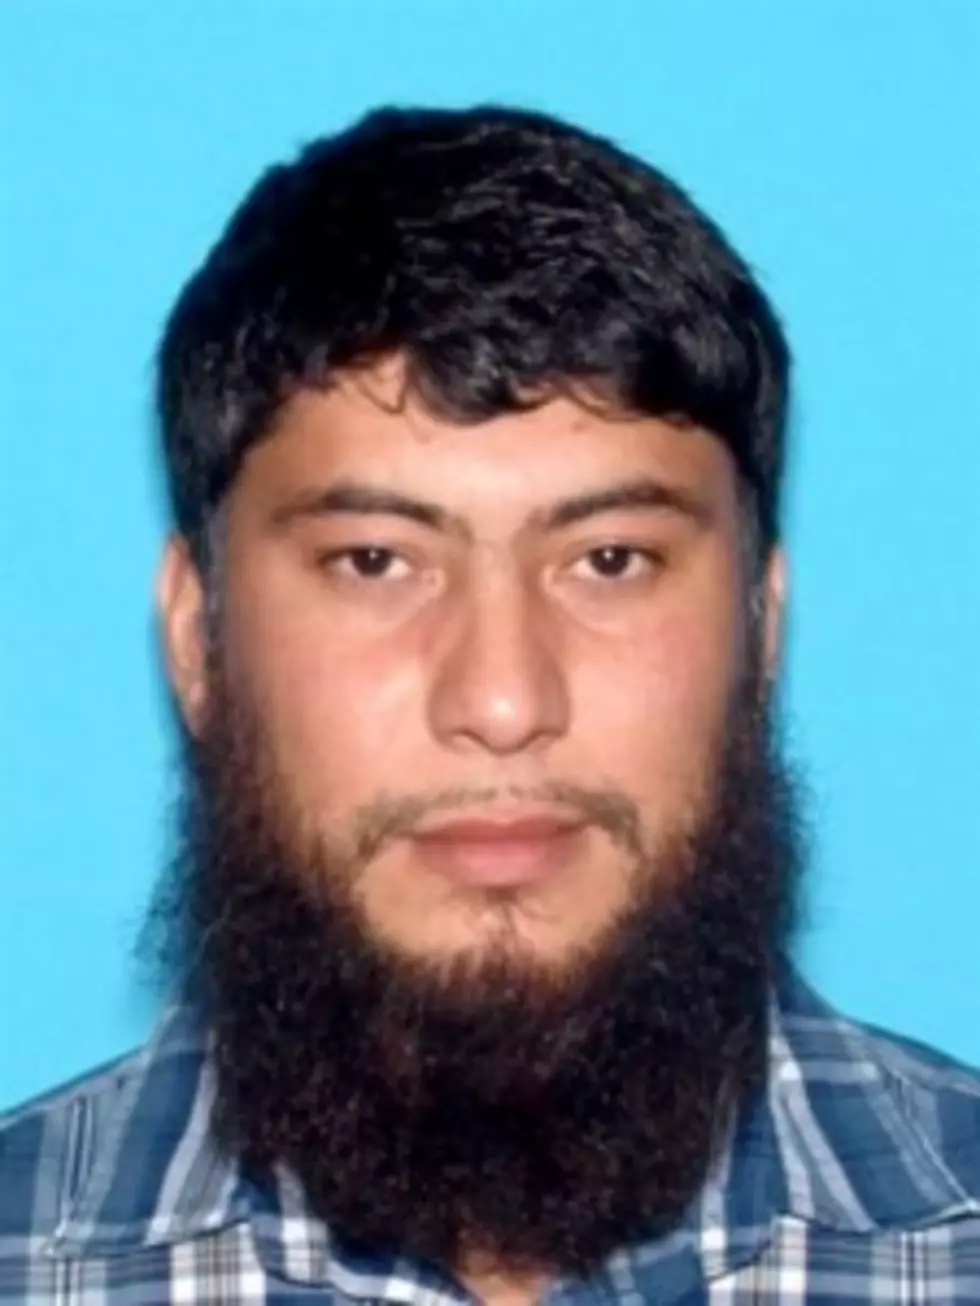 Uzbek Refugee Convicted of Terrorism Conspiracy Charge in US